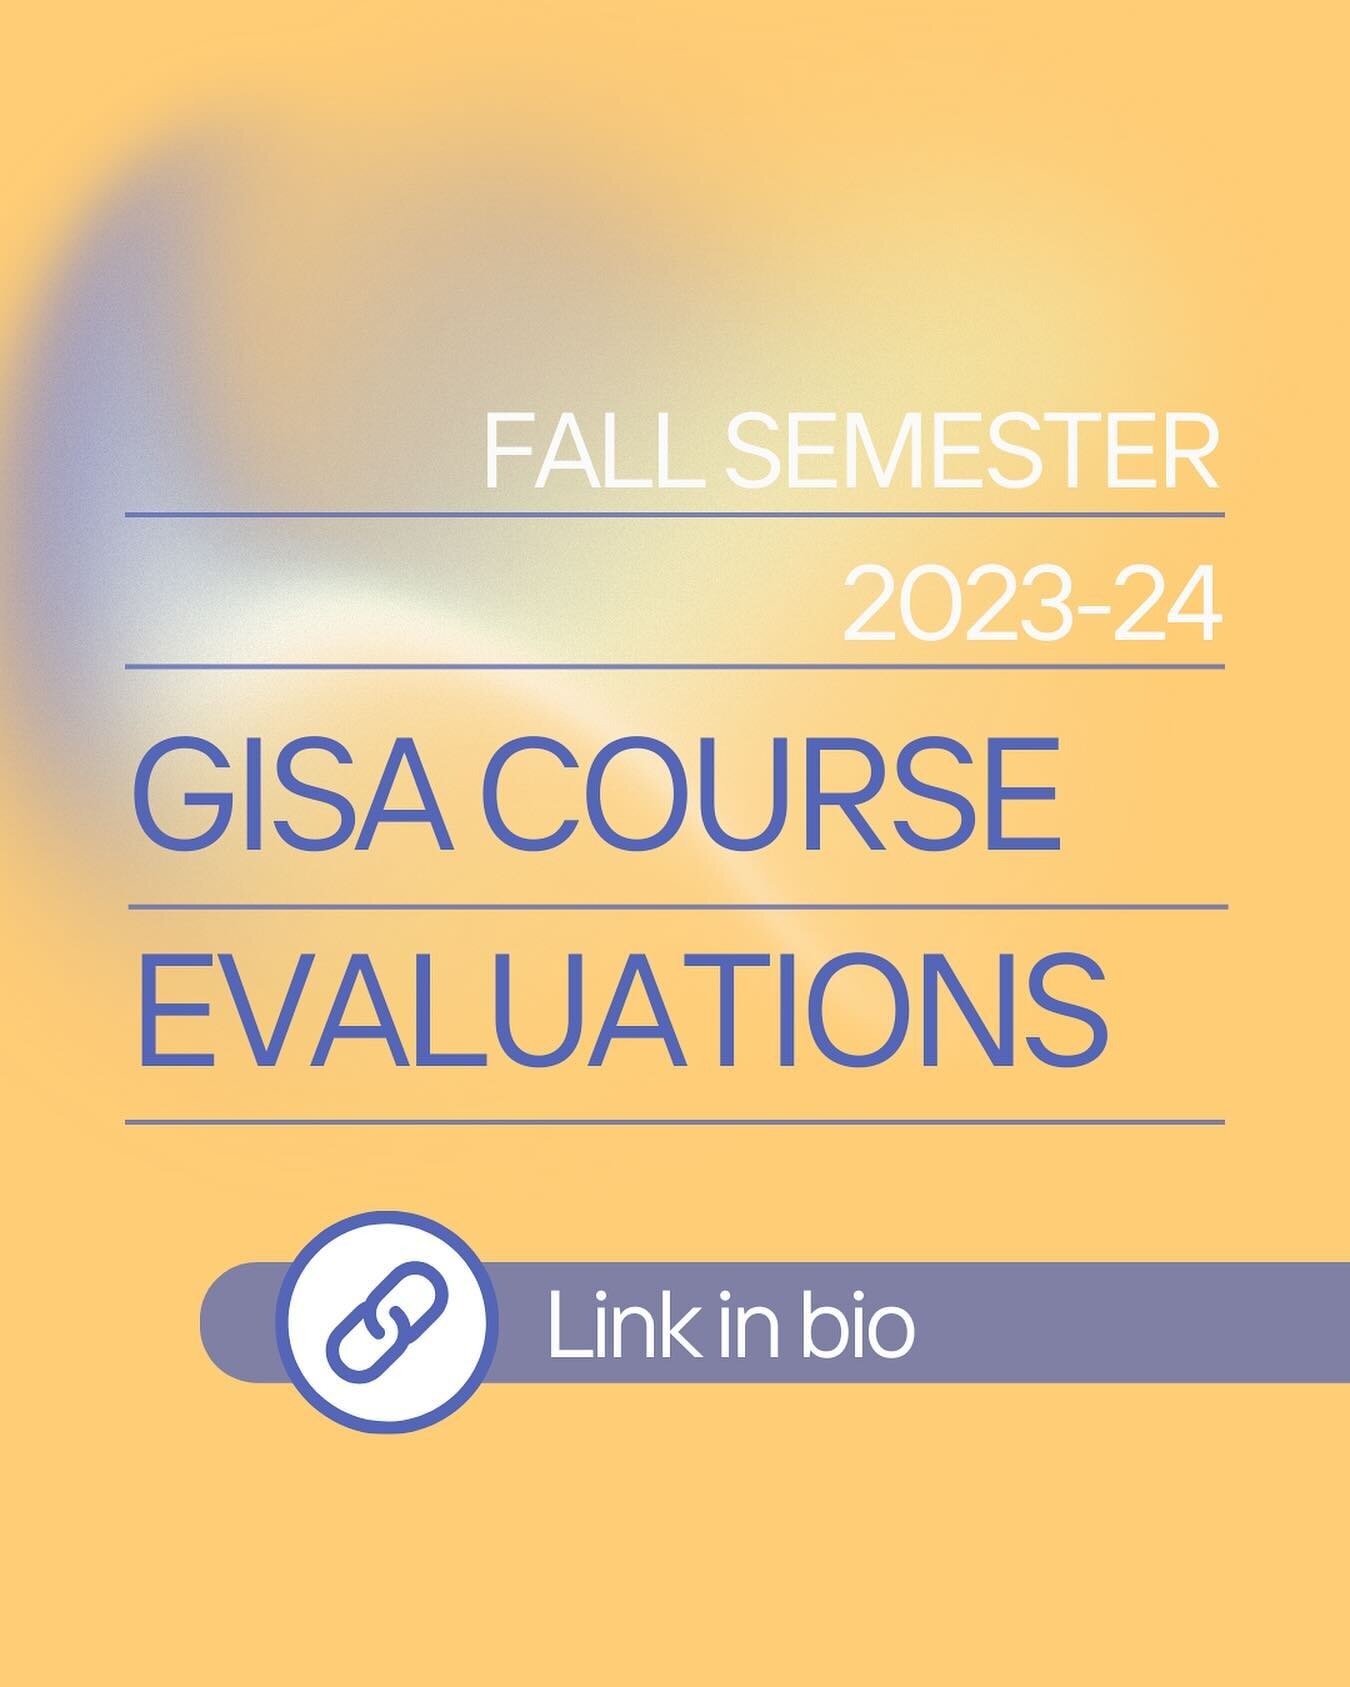 As part of GISA&rsquo;s efforts to have clearer and more transparent feedback on the Institute&rsquo;s courses and professors, we organize GISA Course Evaluations for Master&rsquo;s students each semester. 

Please take a few minutes to fill in the E